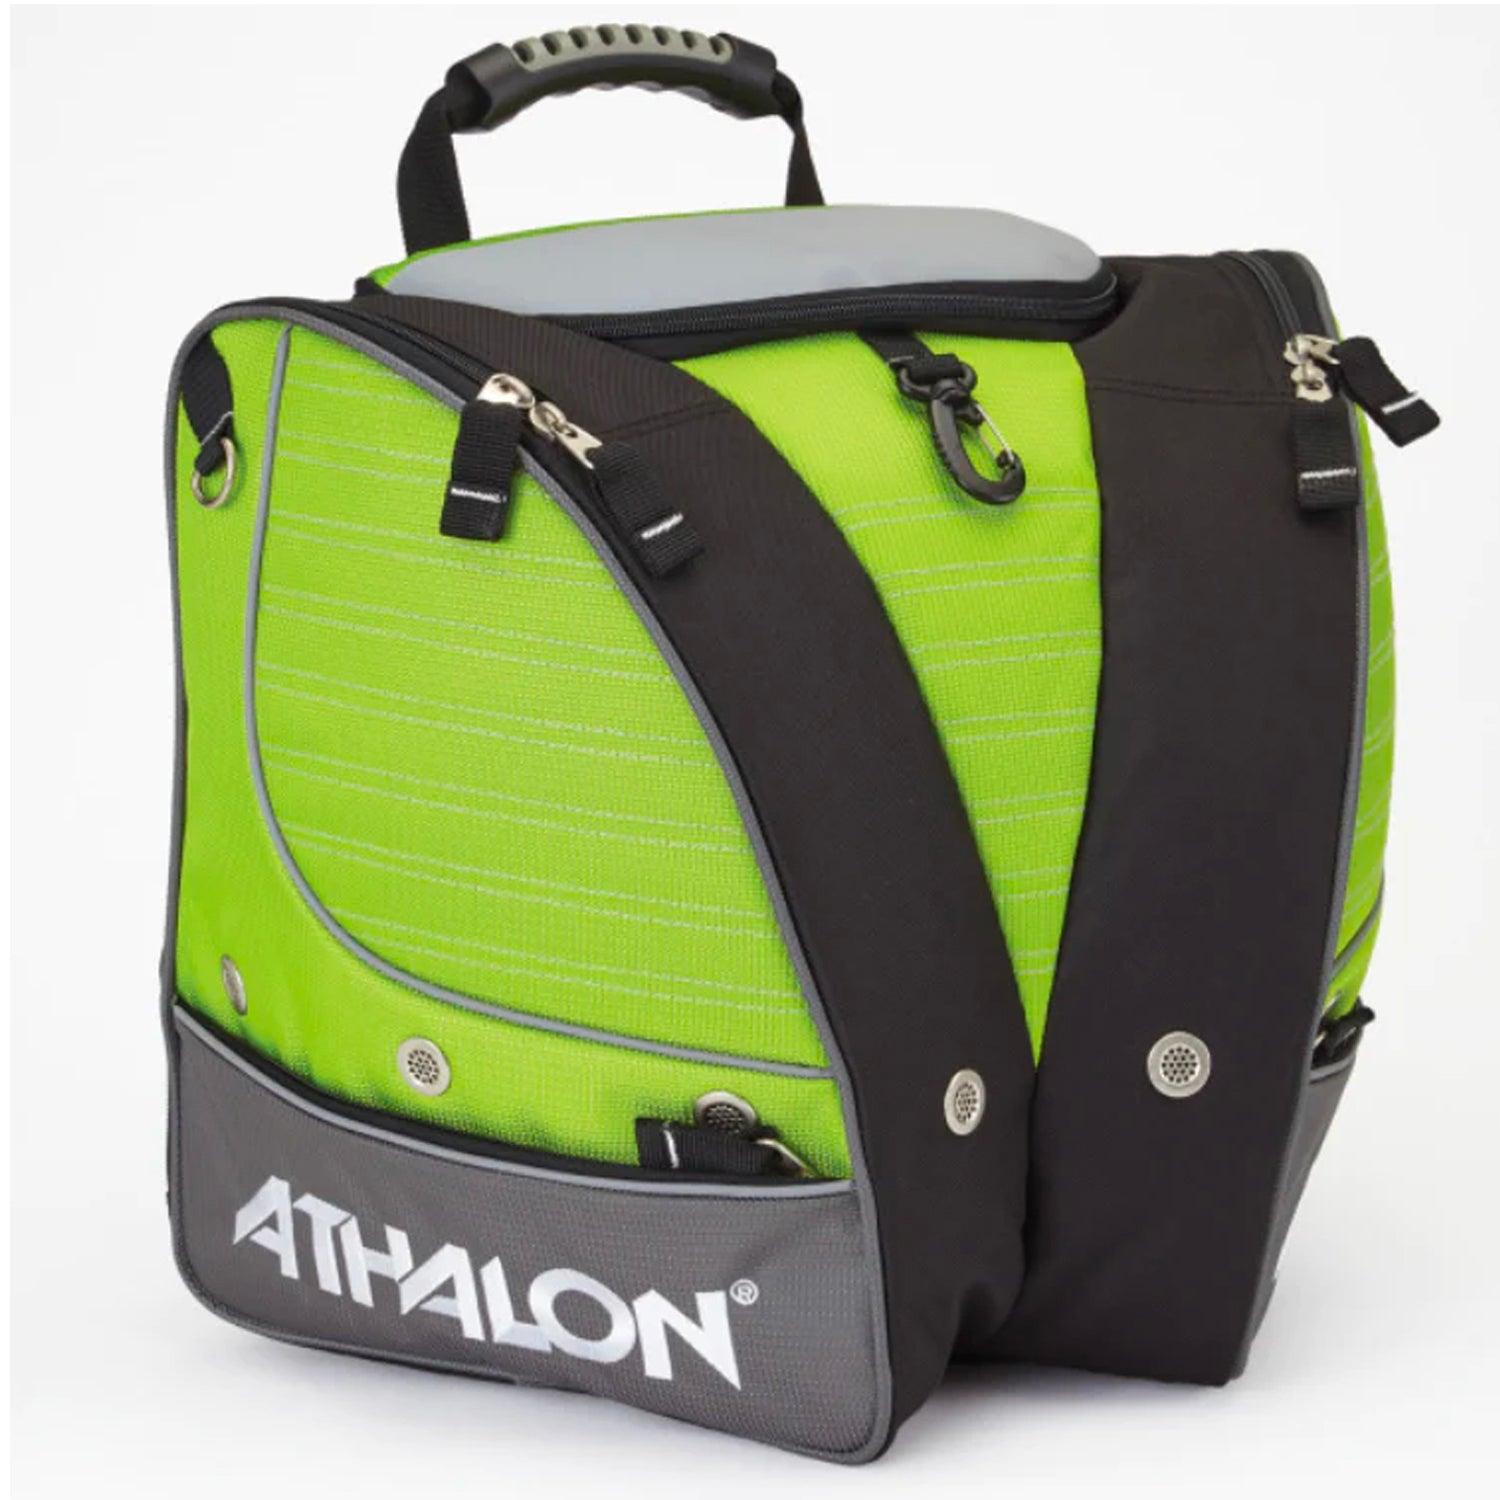 Athalon Adult Personalizable Boot Bag/Backpack for Skiing, Snowboarding, Holds Boots, Helmet, Goggles, Gloves - TRAPSKI, LLC